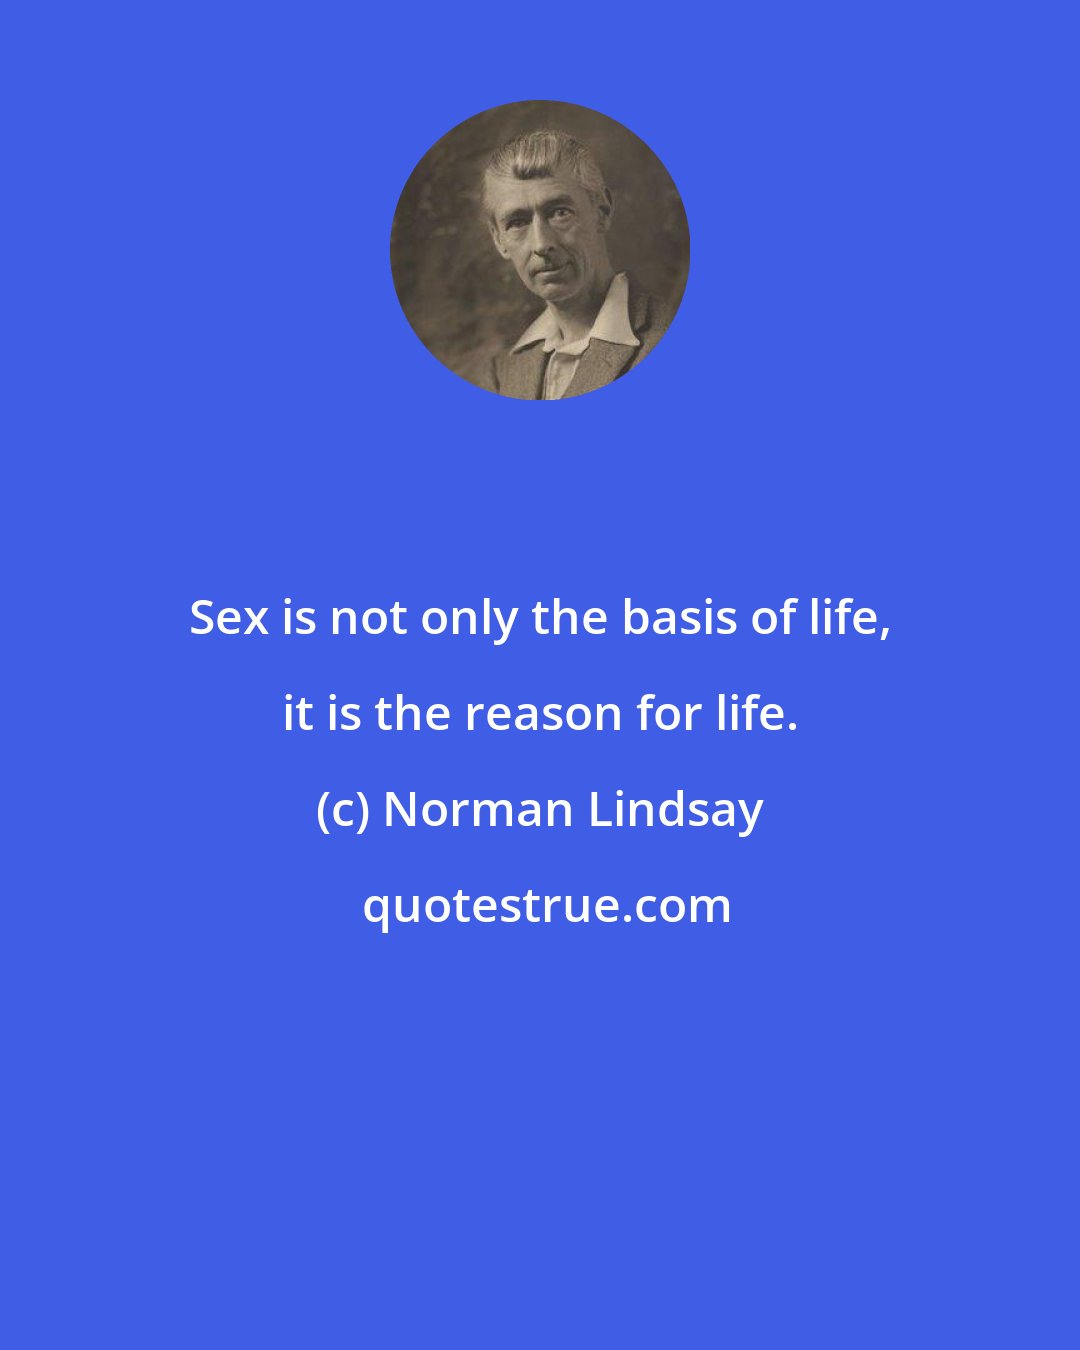 Norman Lindsay: Sex is not only the basis of life, it is the reason for life.